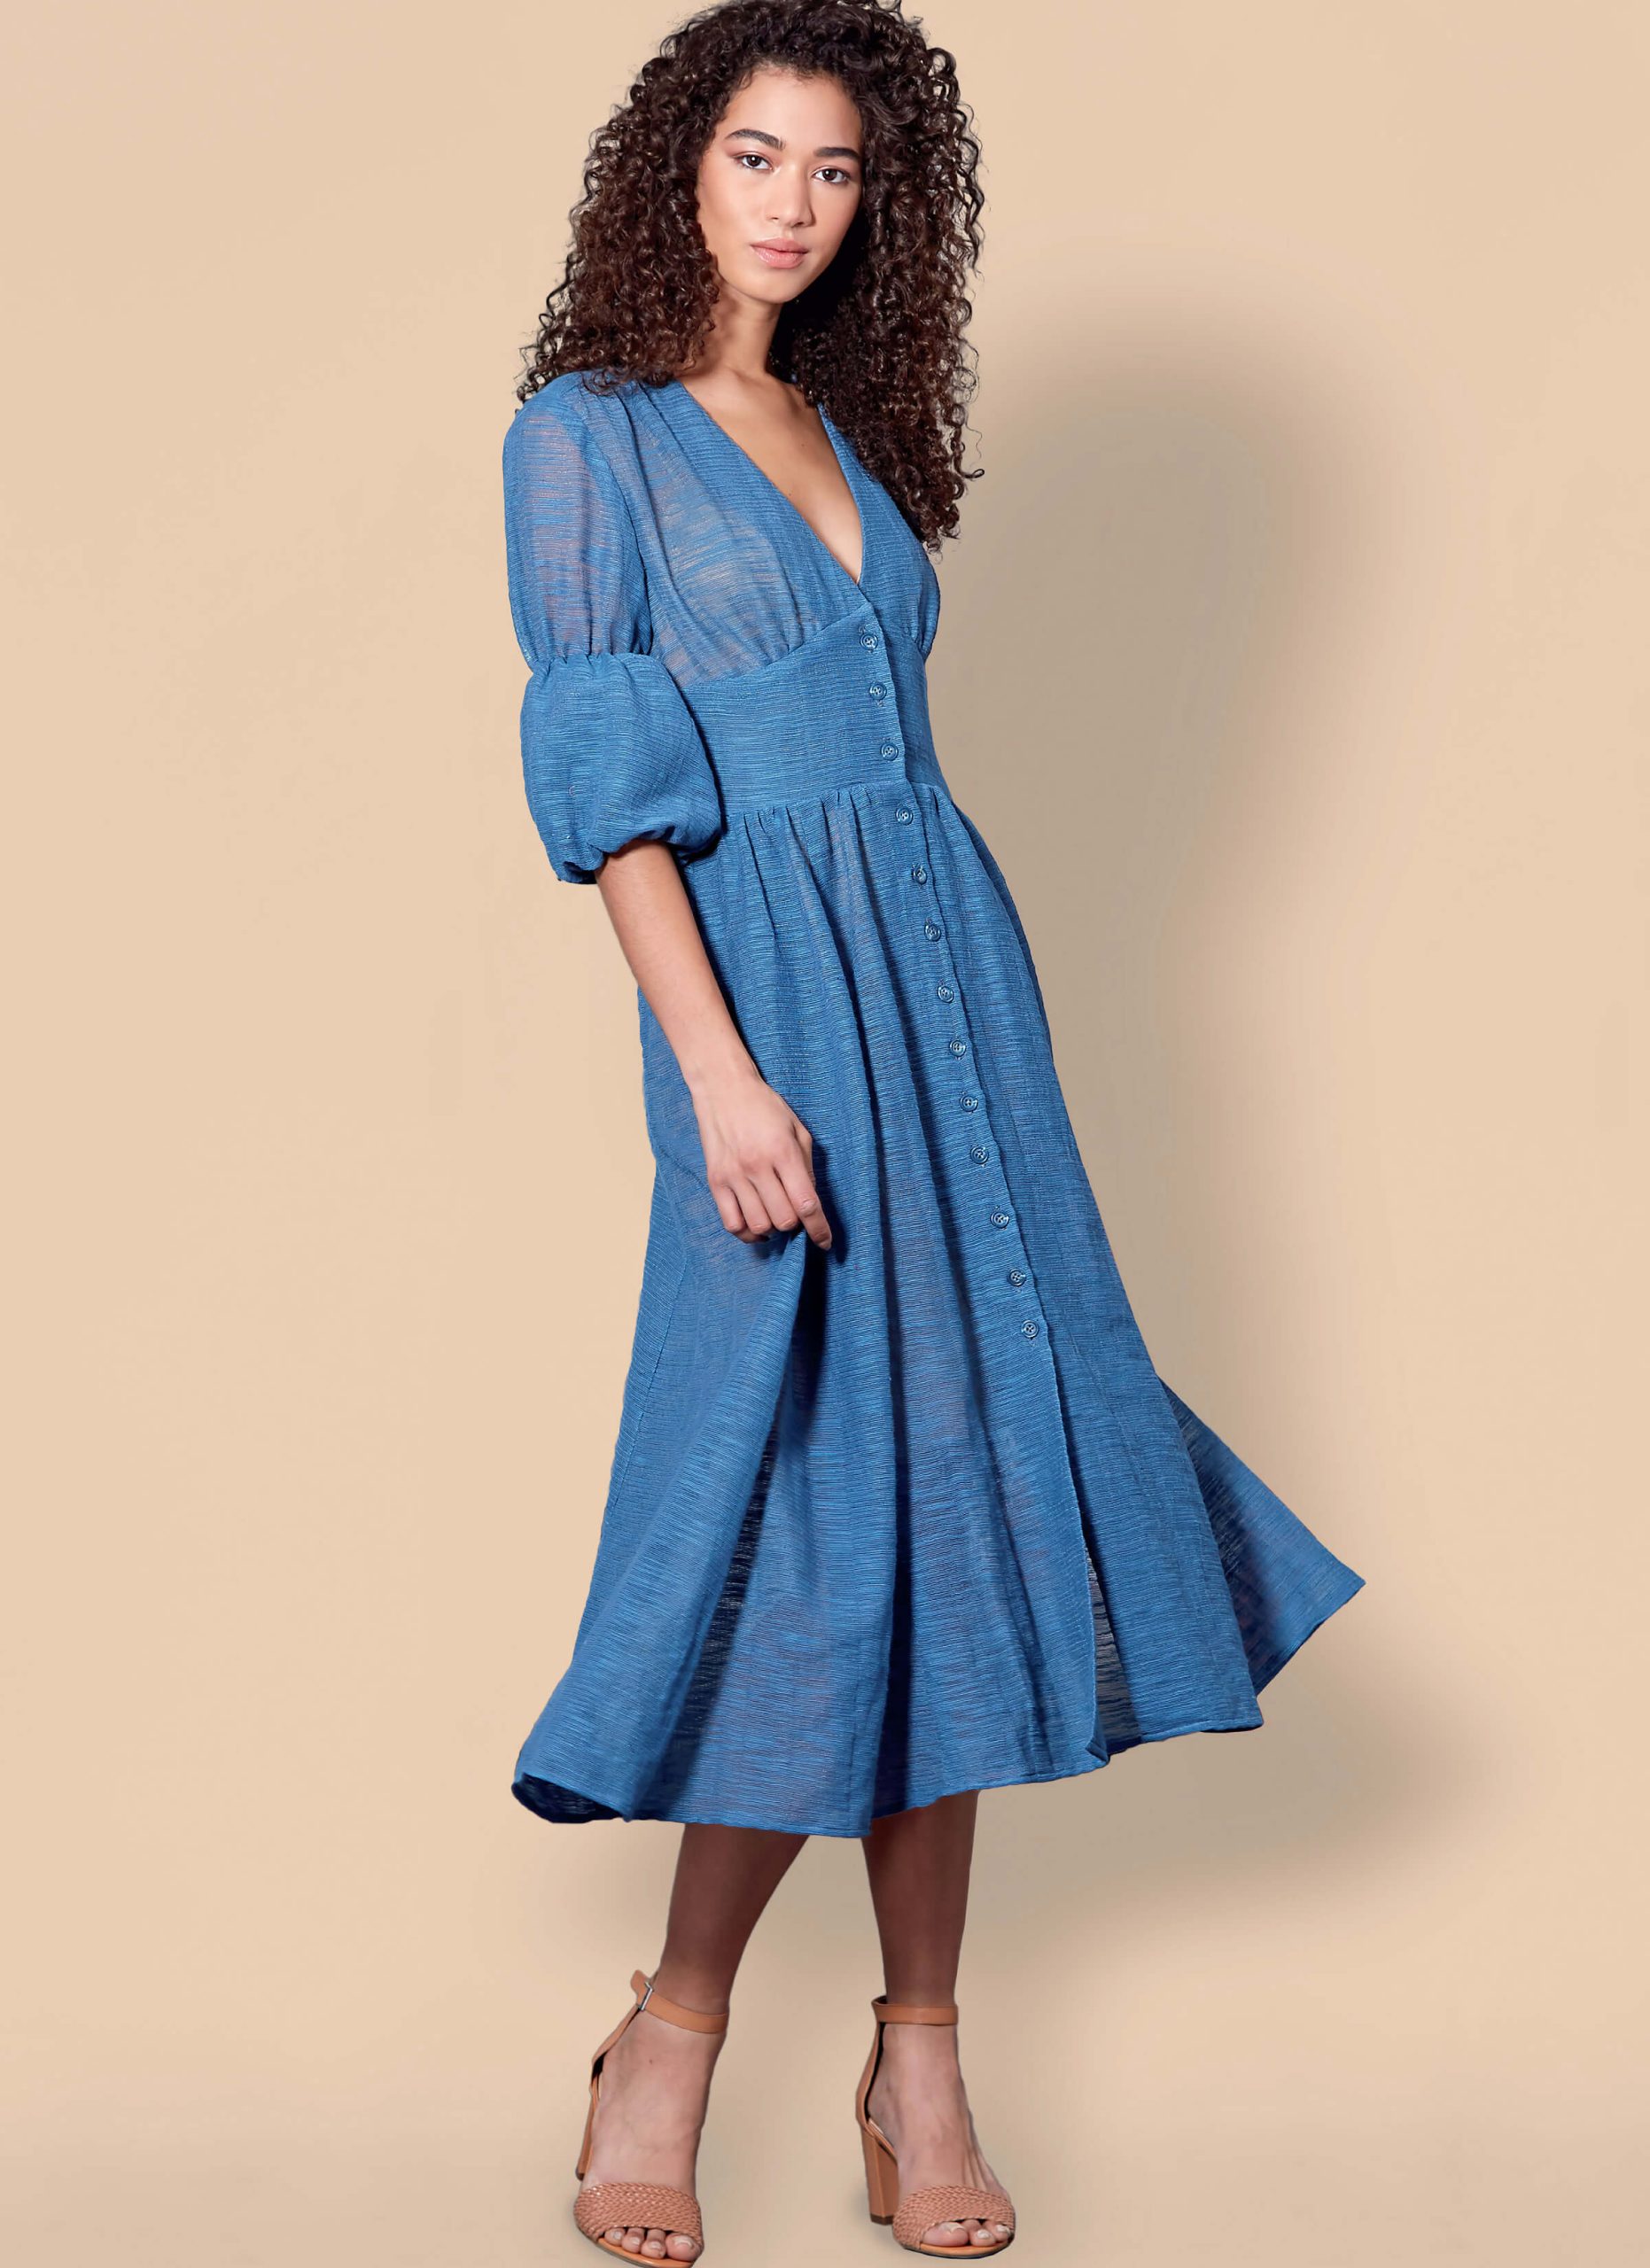 McCall’s Sewing Pattern M7974 Misses’ Dresses - Sewdirect